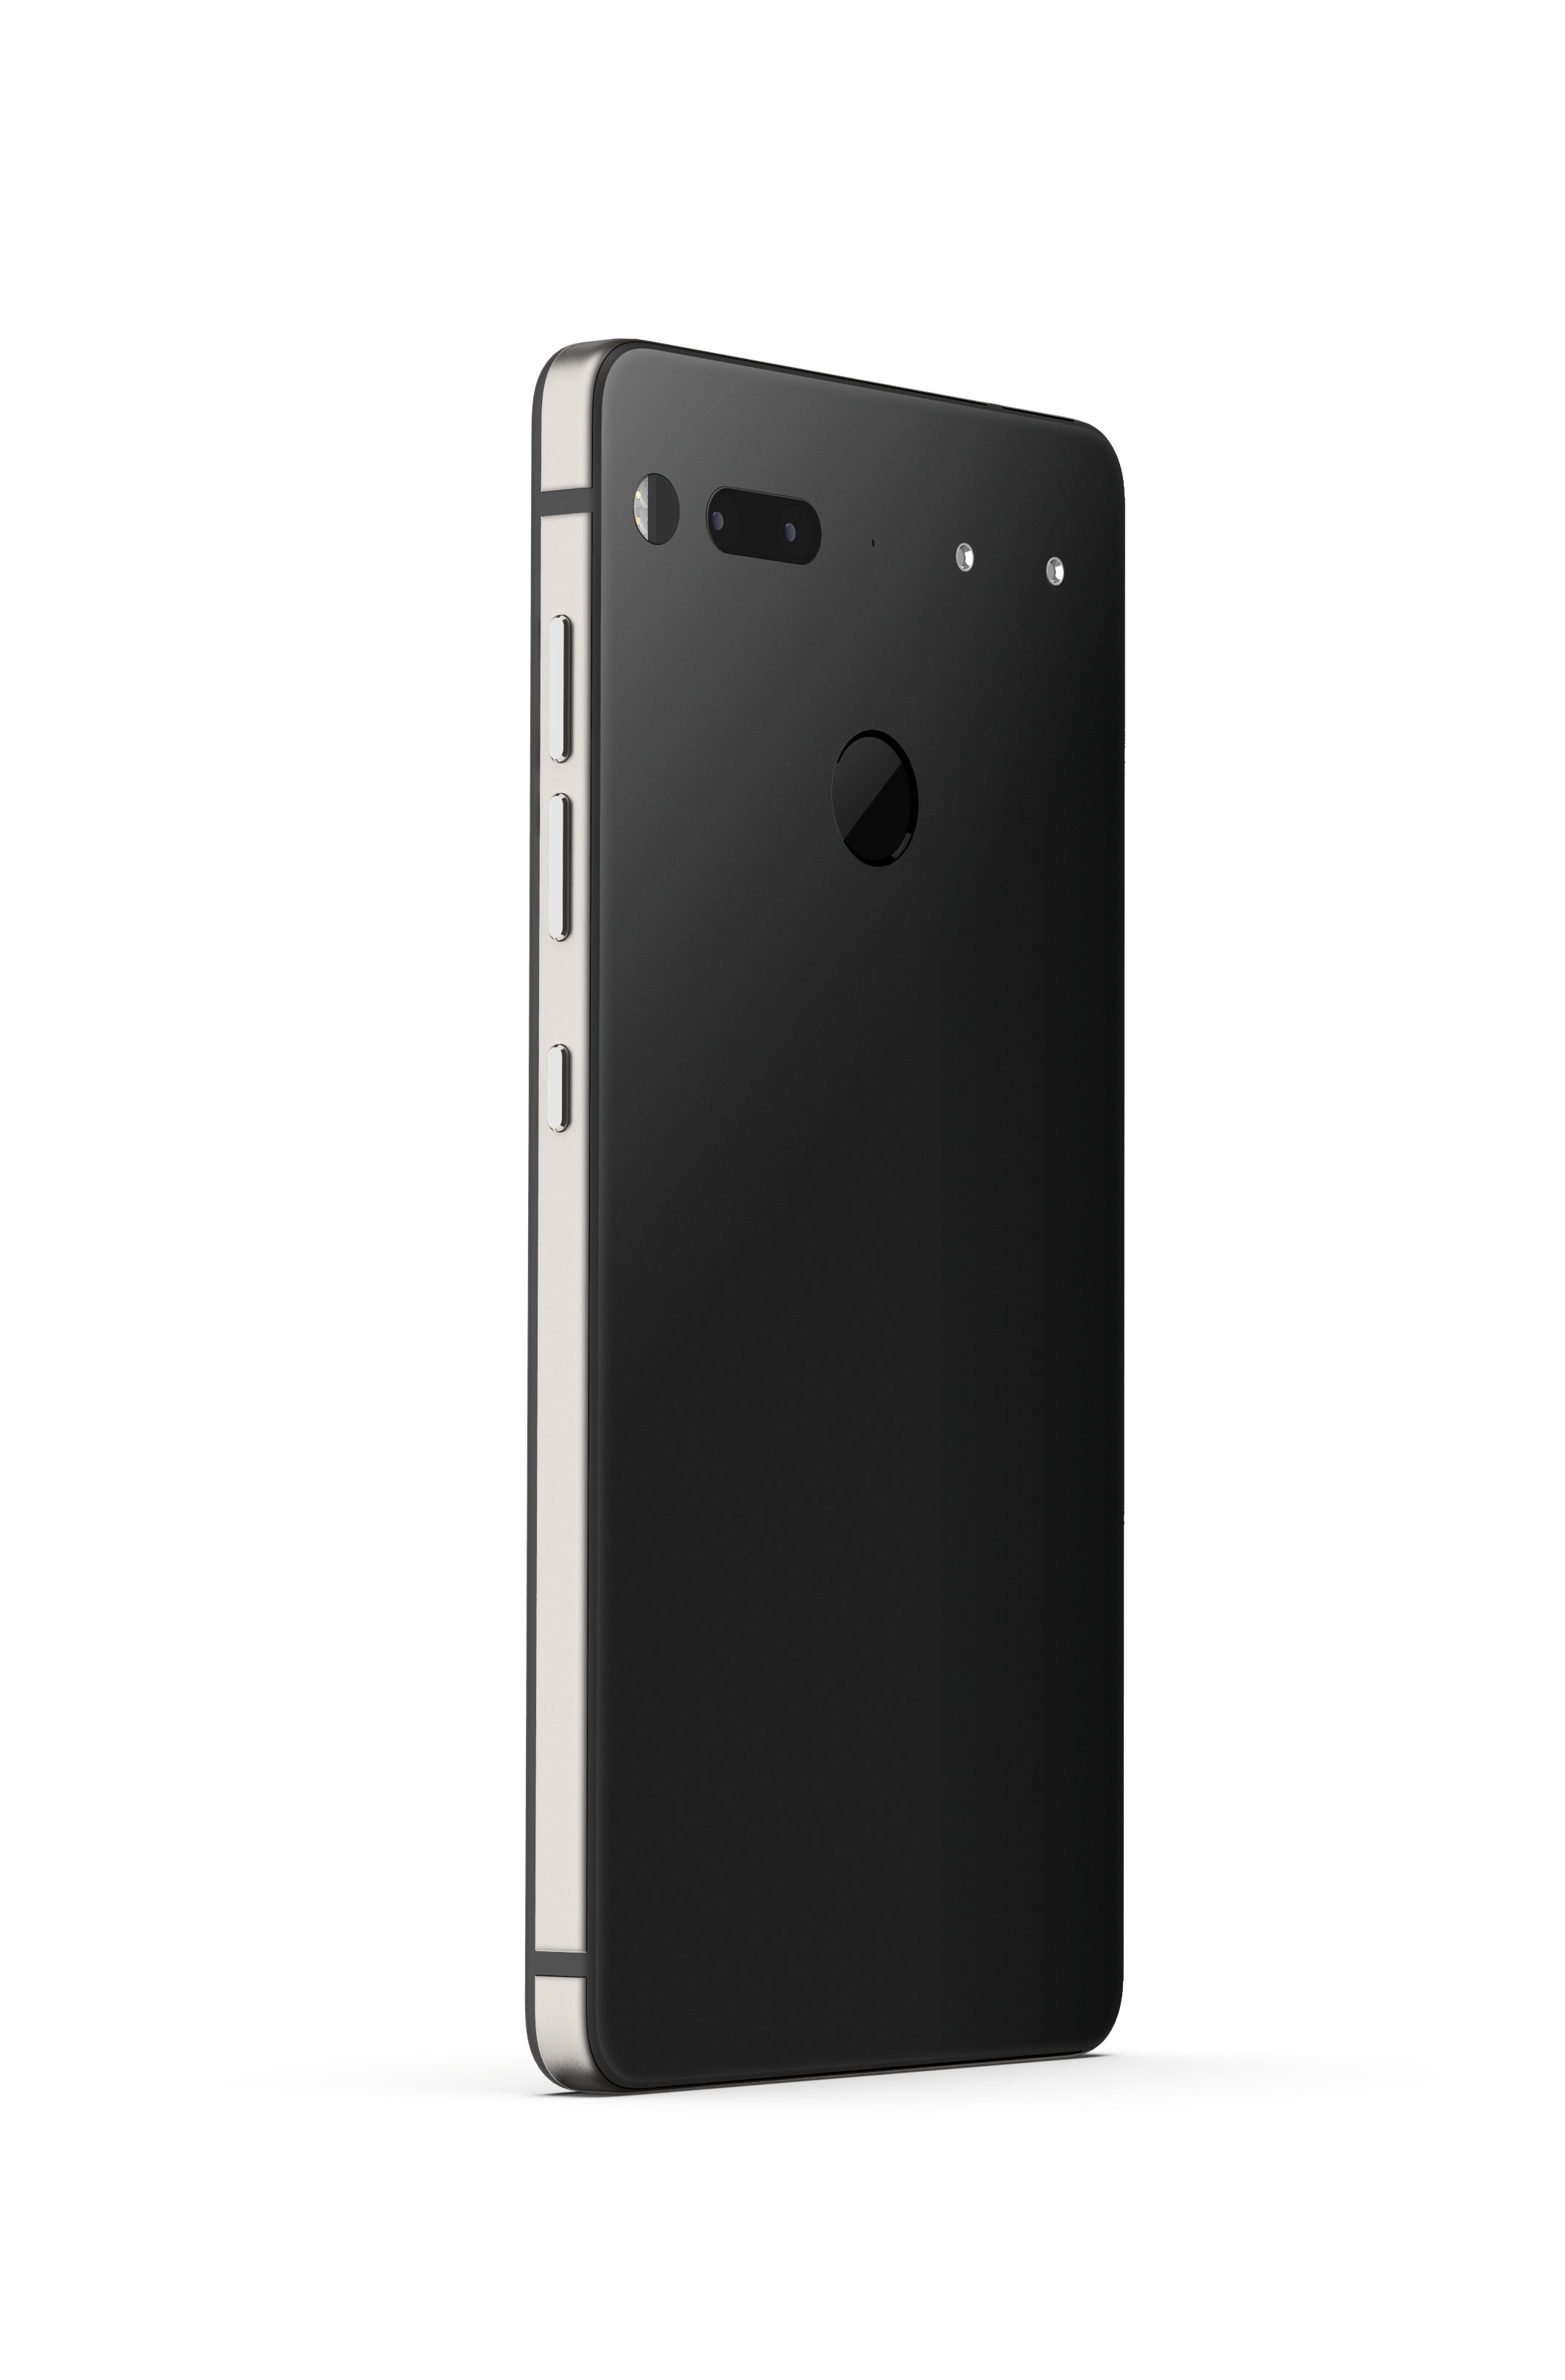 Essential Phone's new 'Halo Gray' color goes on sale exclusively 